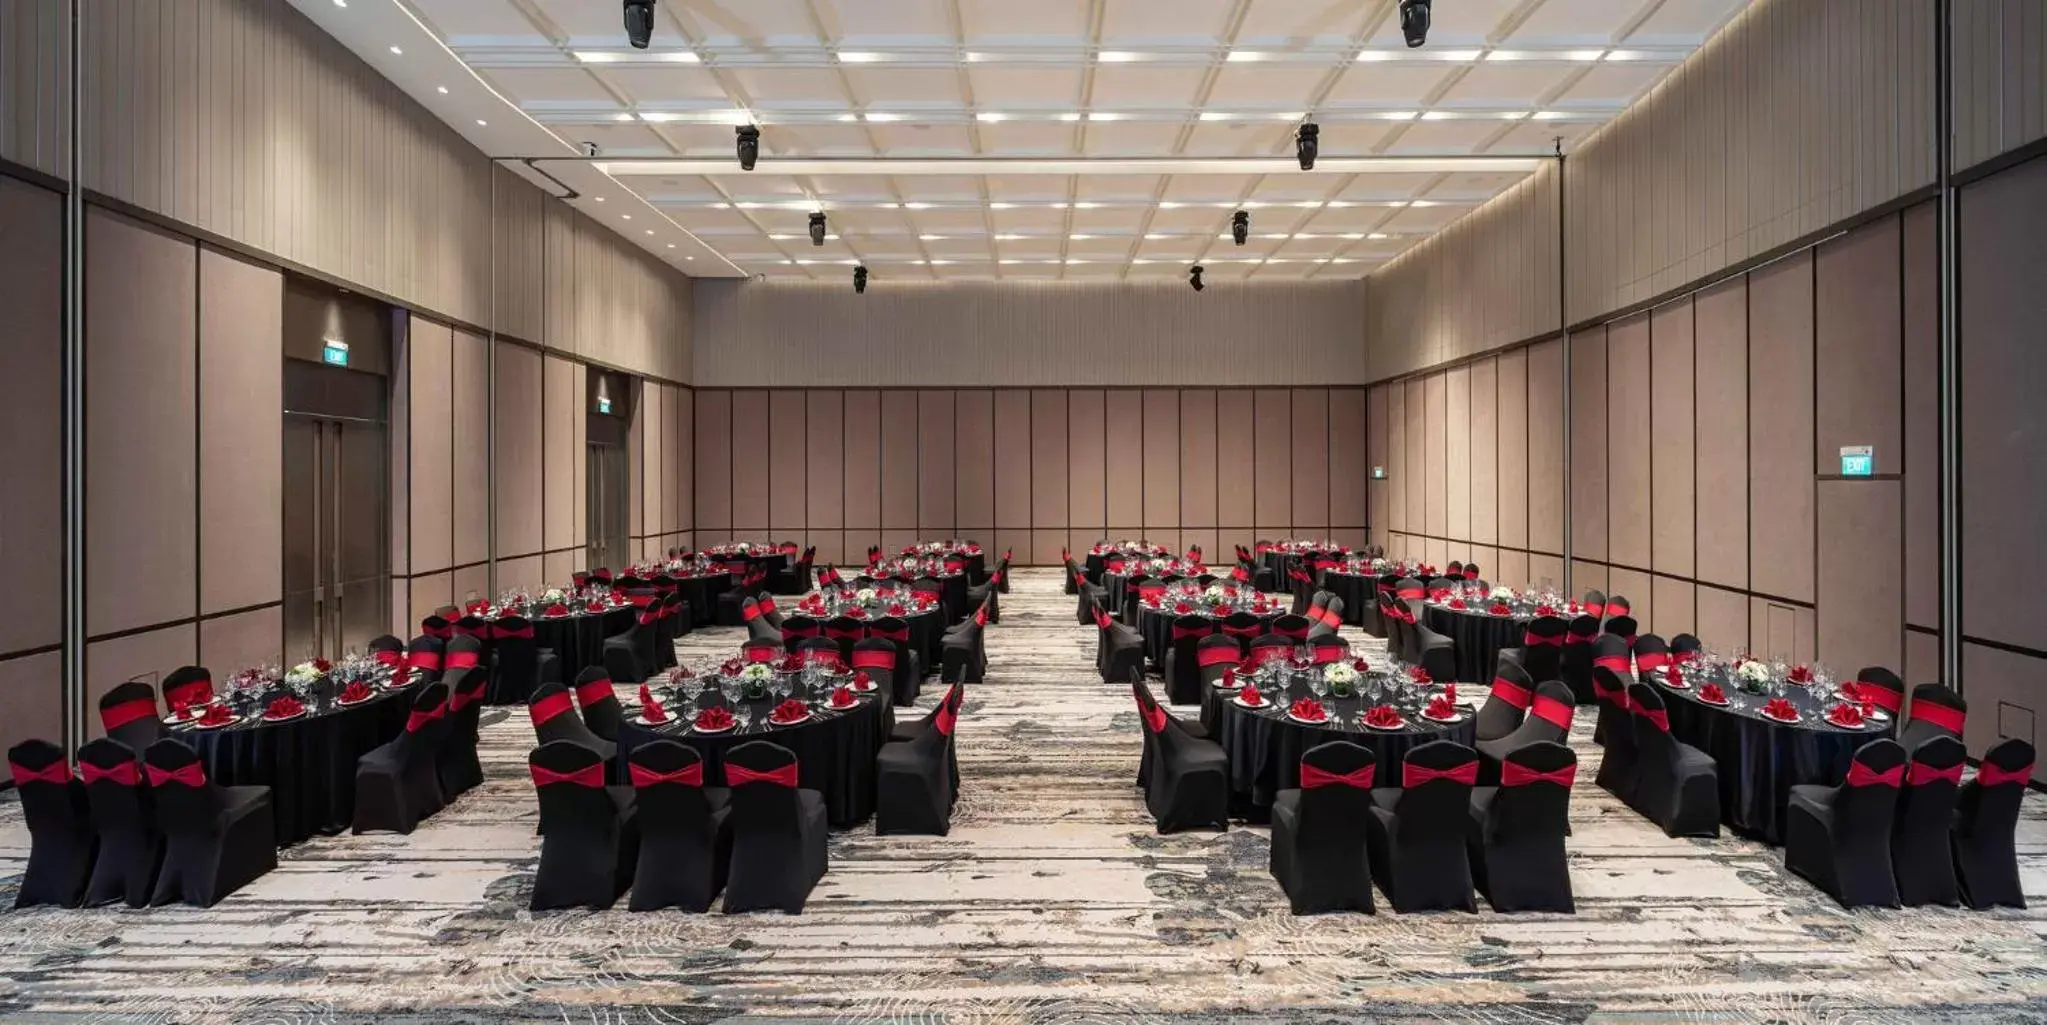 Meeting/conference room, Banquet Facilities in Crowne Plaza Phu Quoc Starbay, an IHG Hotel